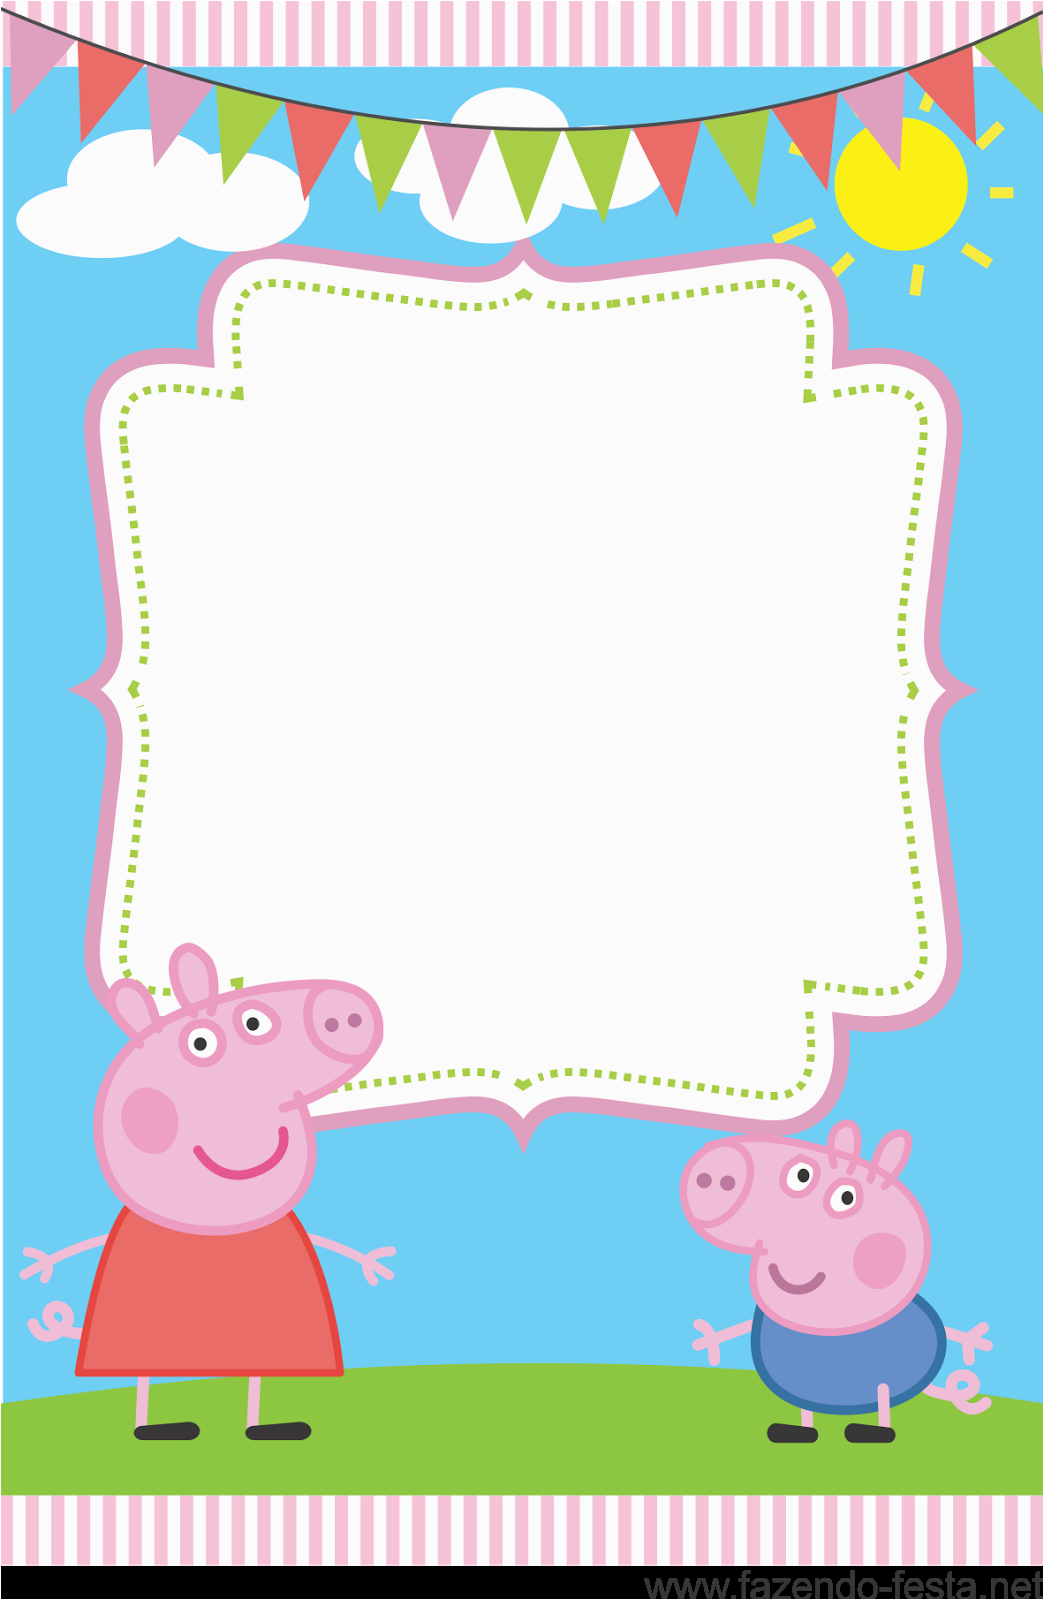 Free Printable Peppa Pig Birthday Invitations 1000 Images About Peppa Pig On Pinterest Coloring